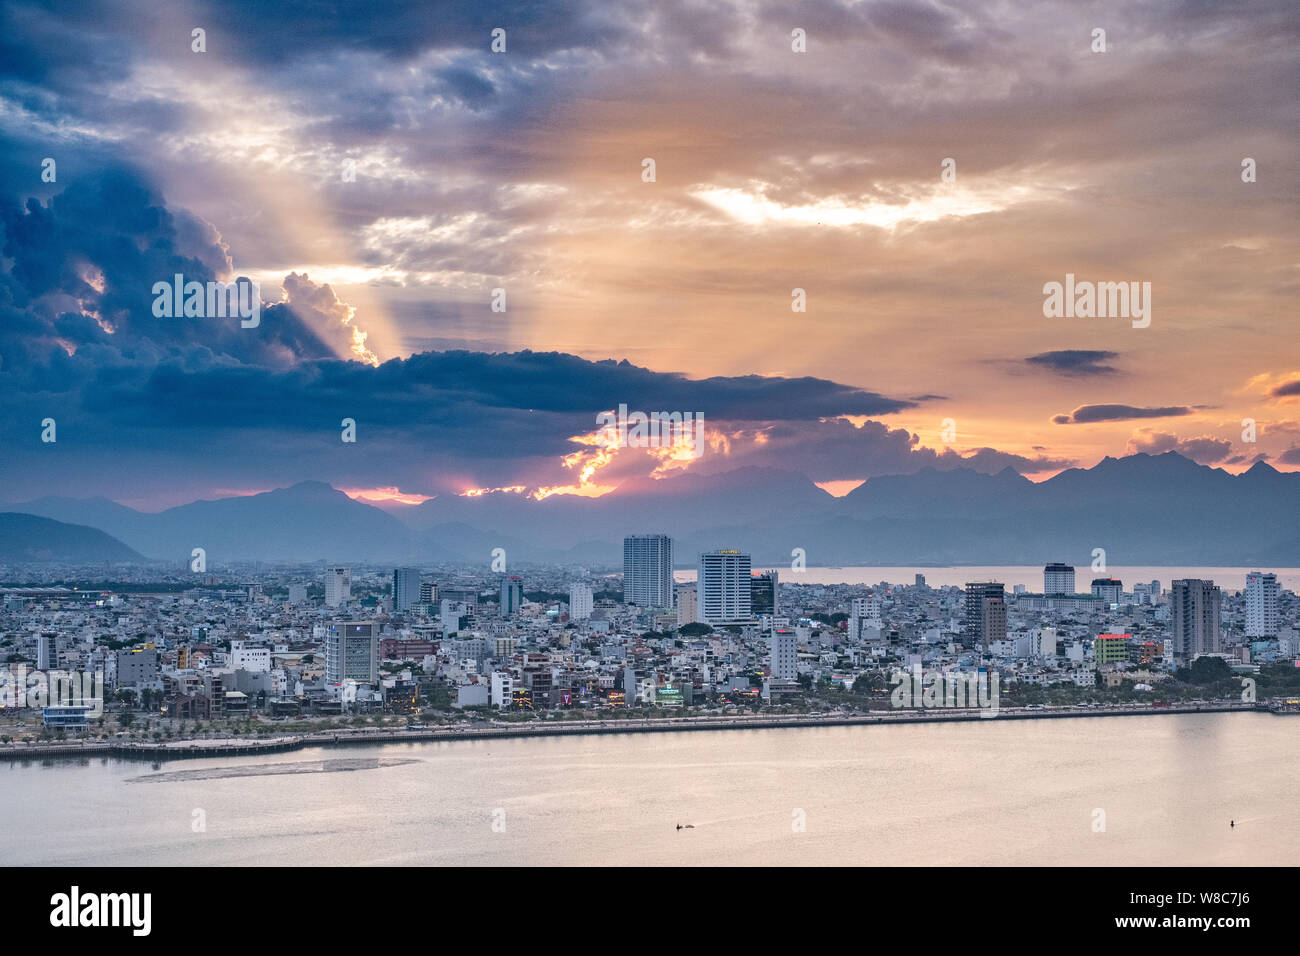 Overview of  Đà Nẵng at sunset, central Vietnam Stock Photo